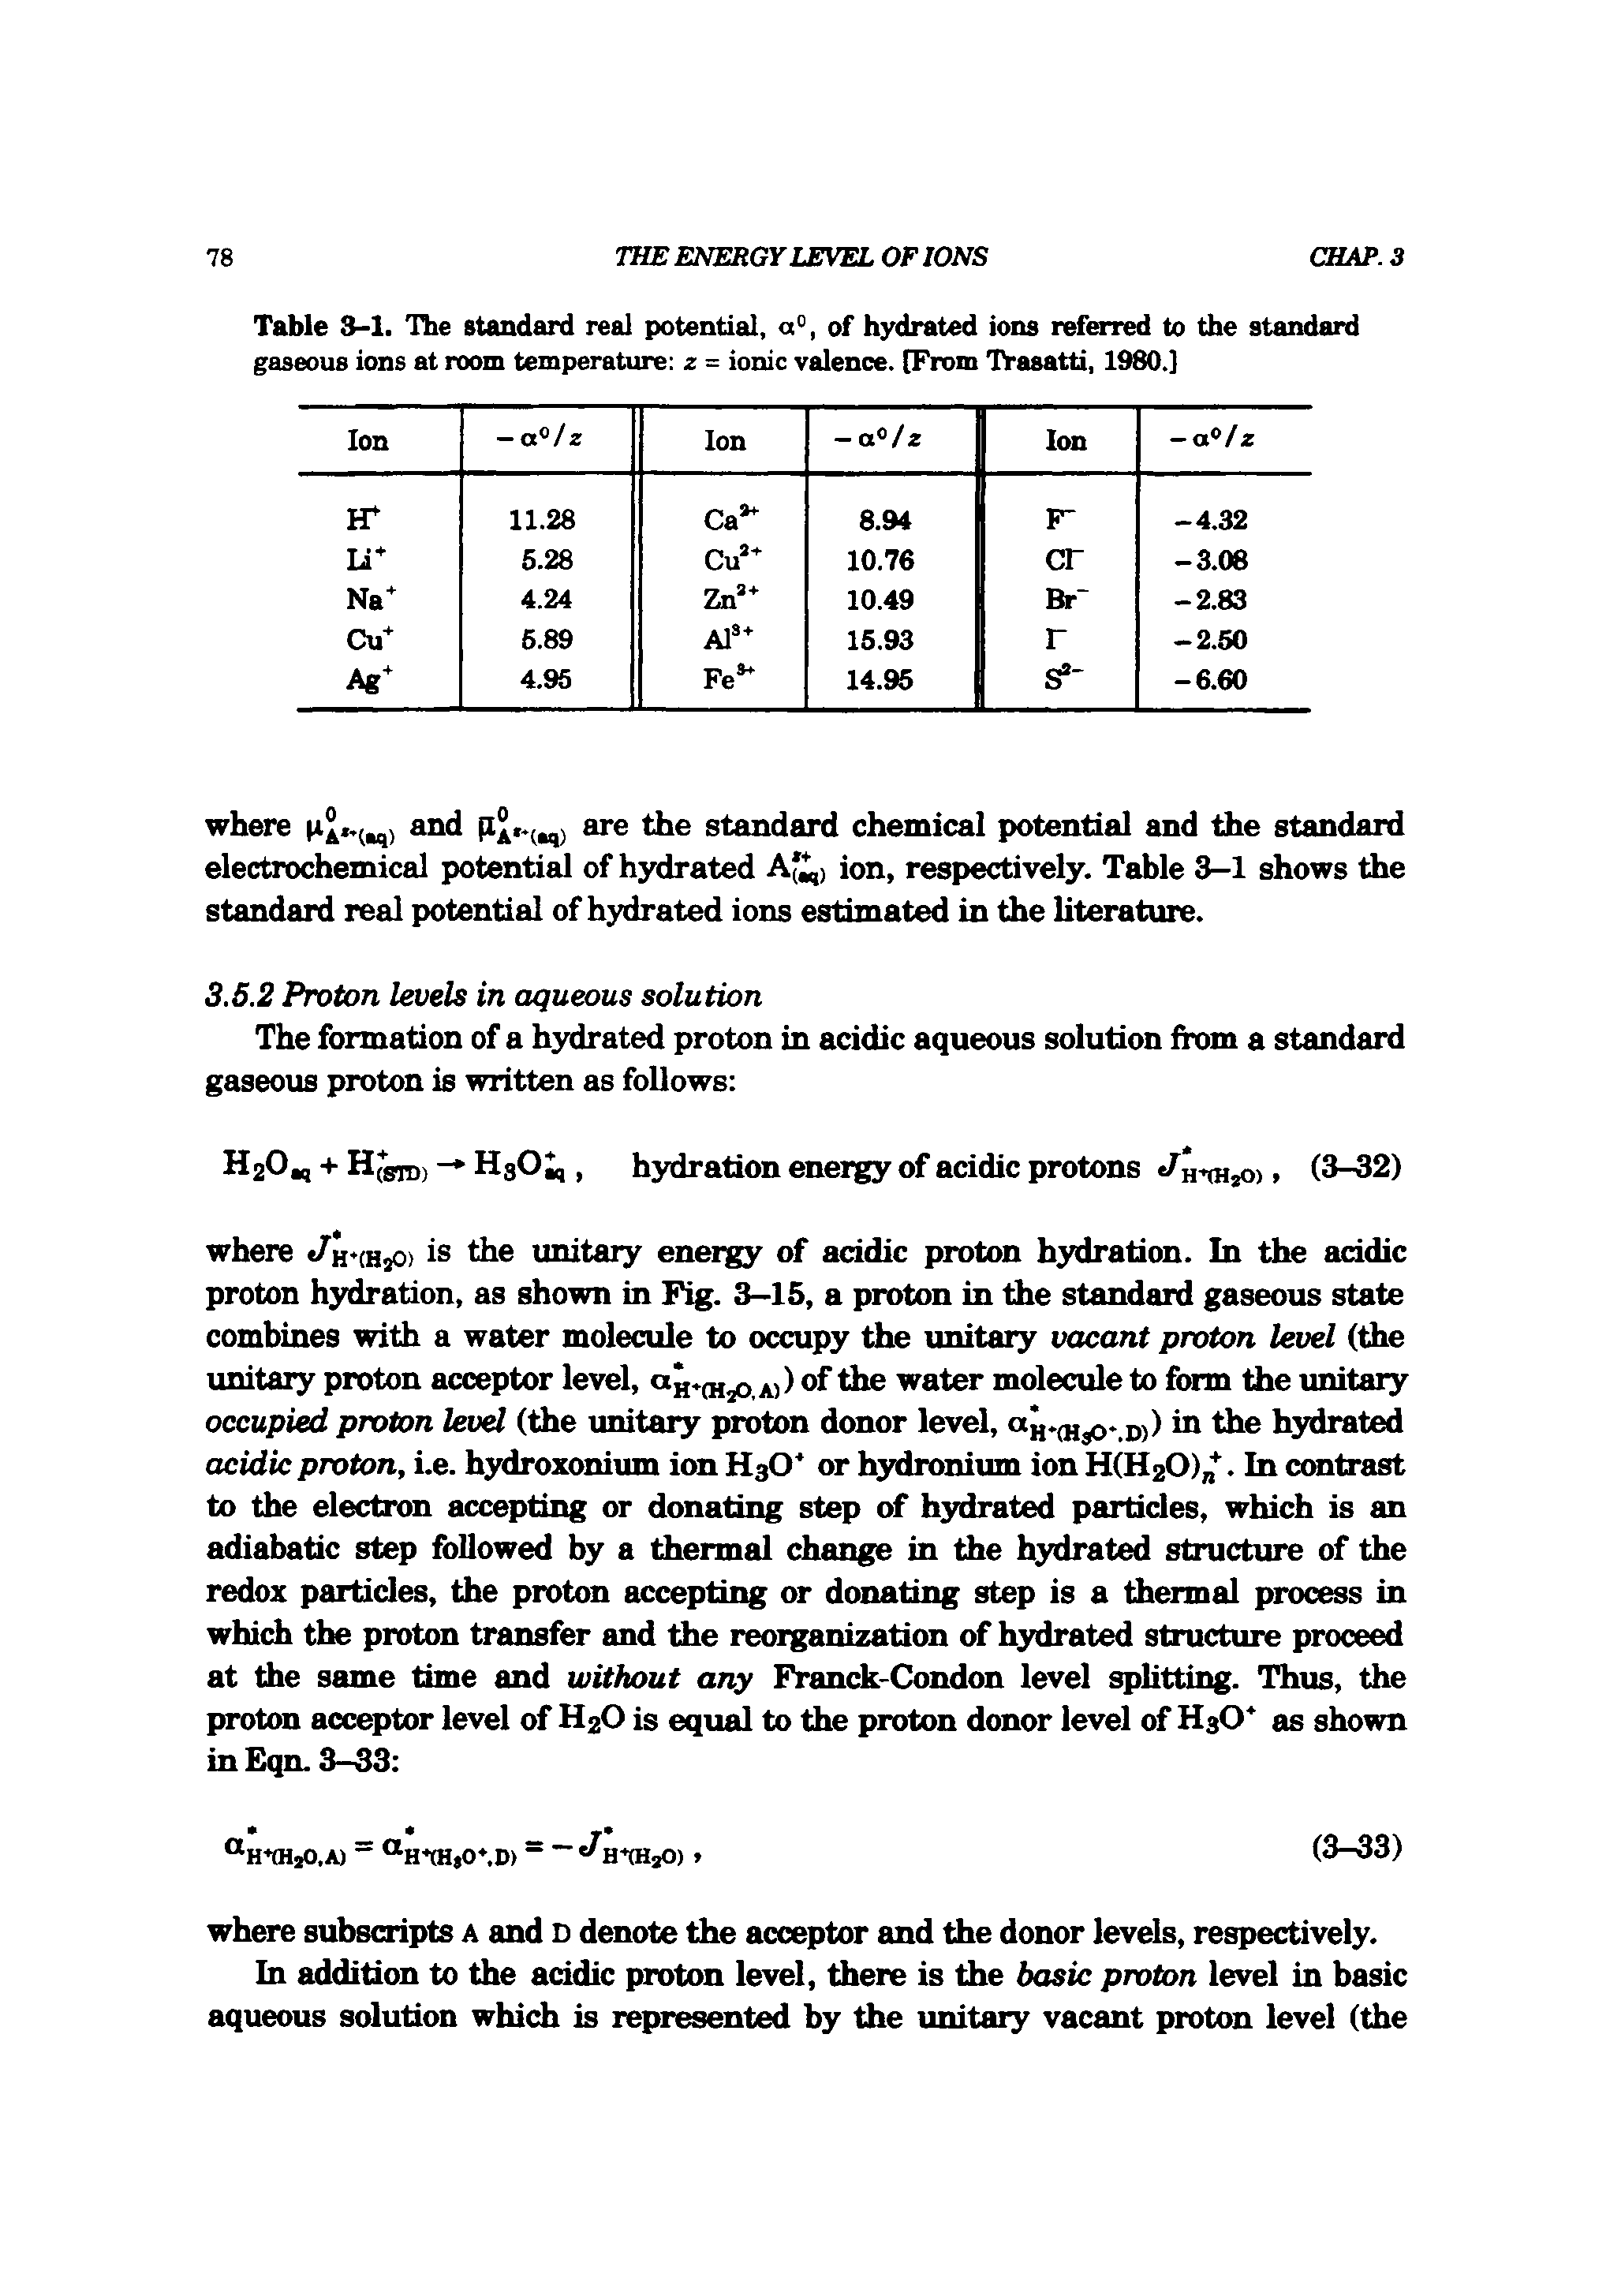 Table 3-1. Ibe standard real potential, a°, of hydrated ions referred to the standard gaseous ions at room temperature z = ionic valence. [From Trasatti, 1980.]...